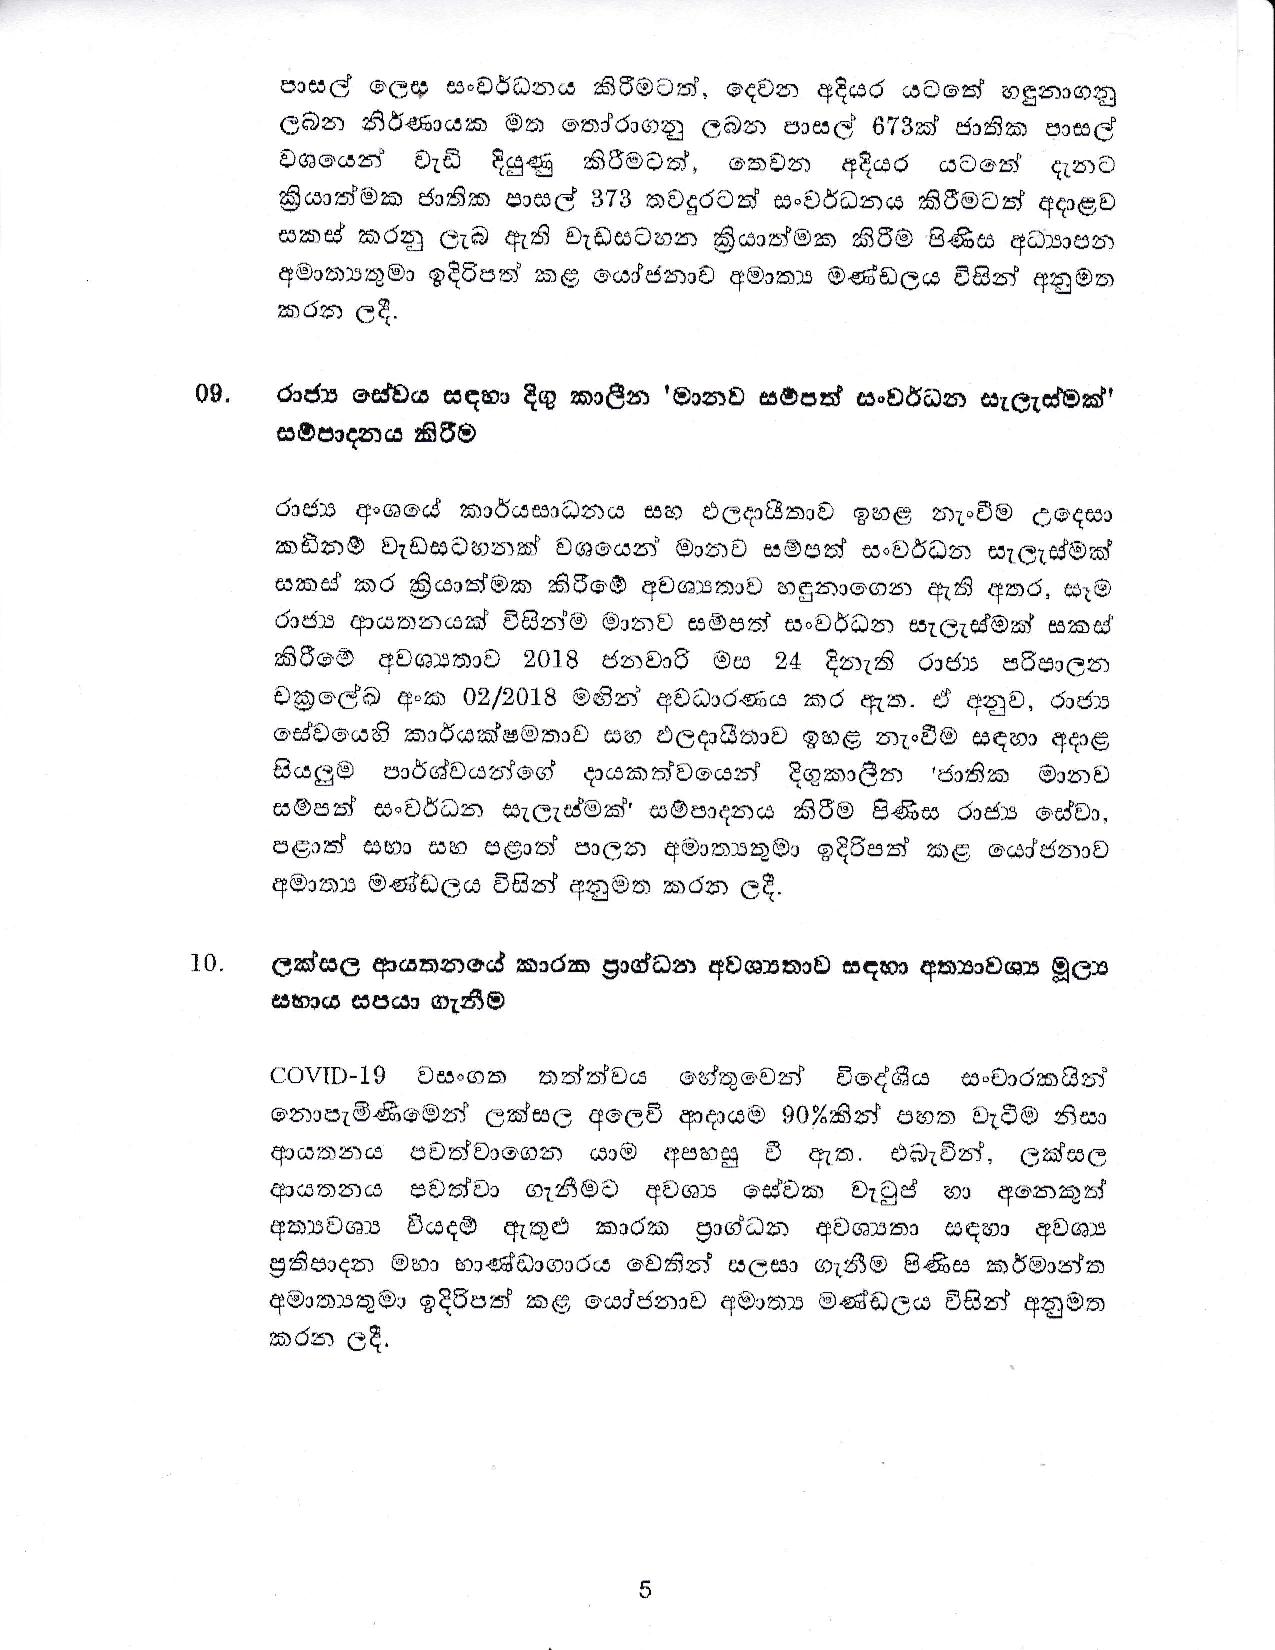 Cabinet Decision on 07.12.2020 page 005